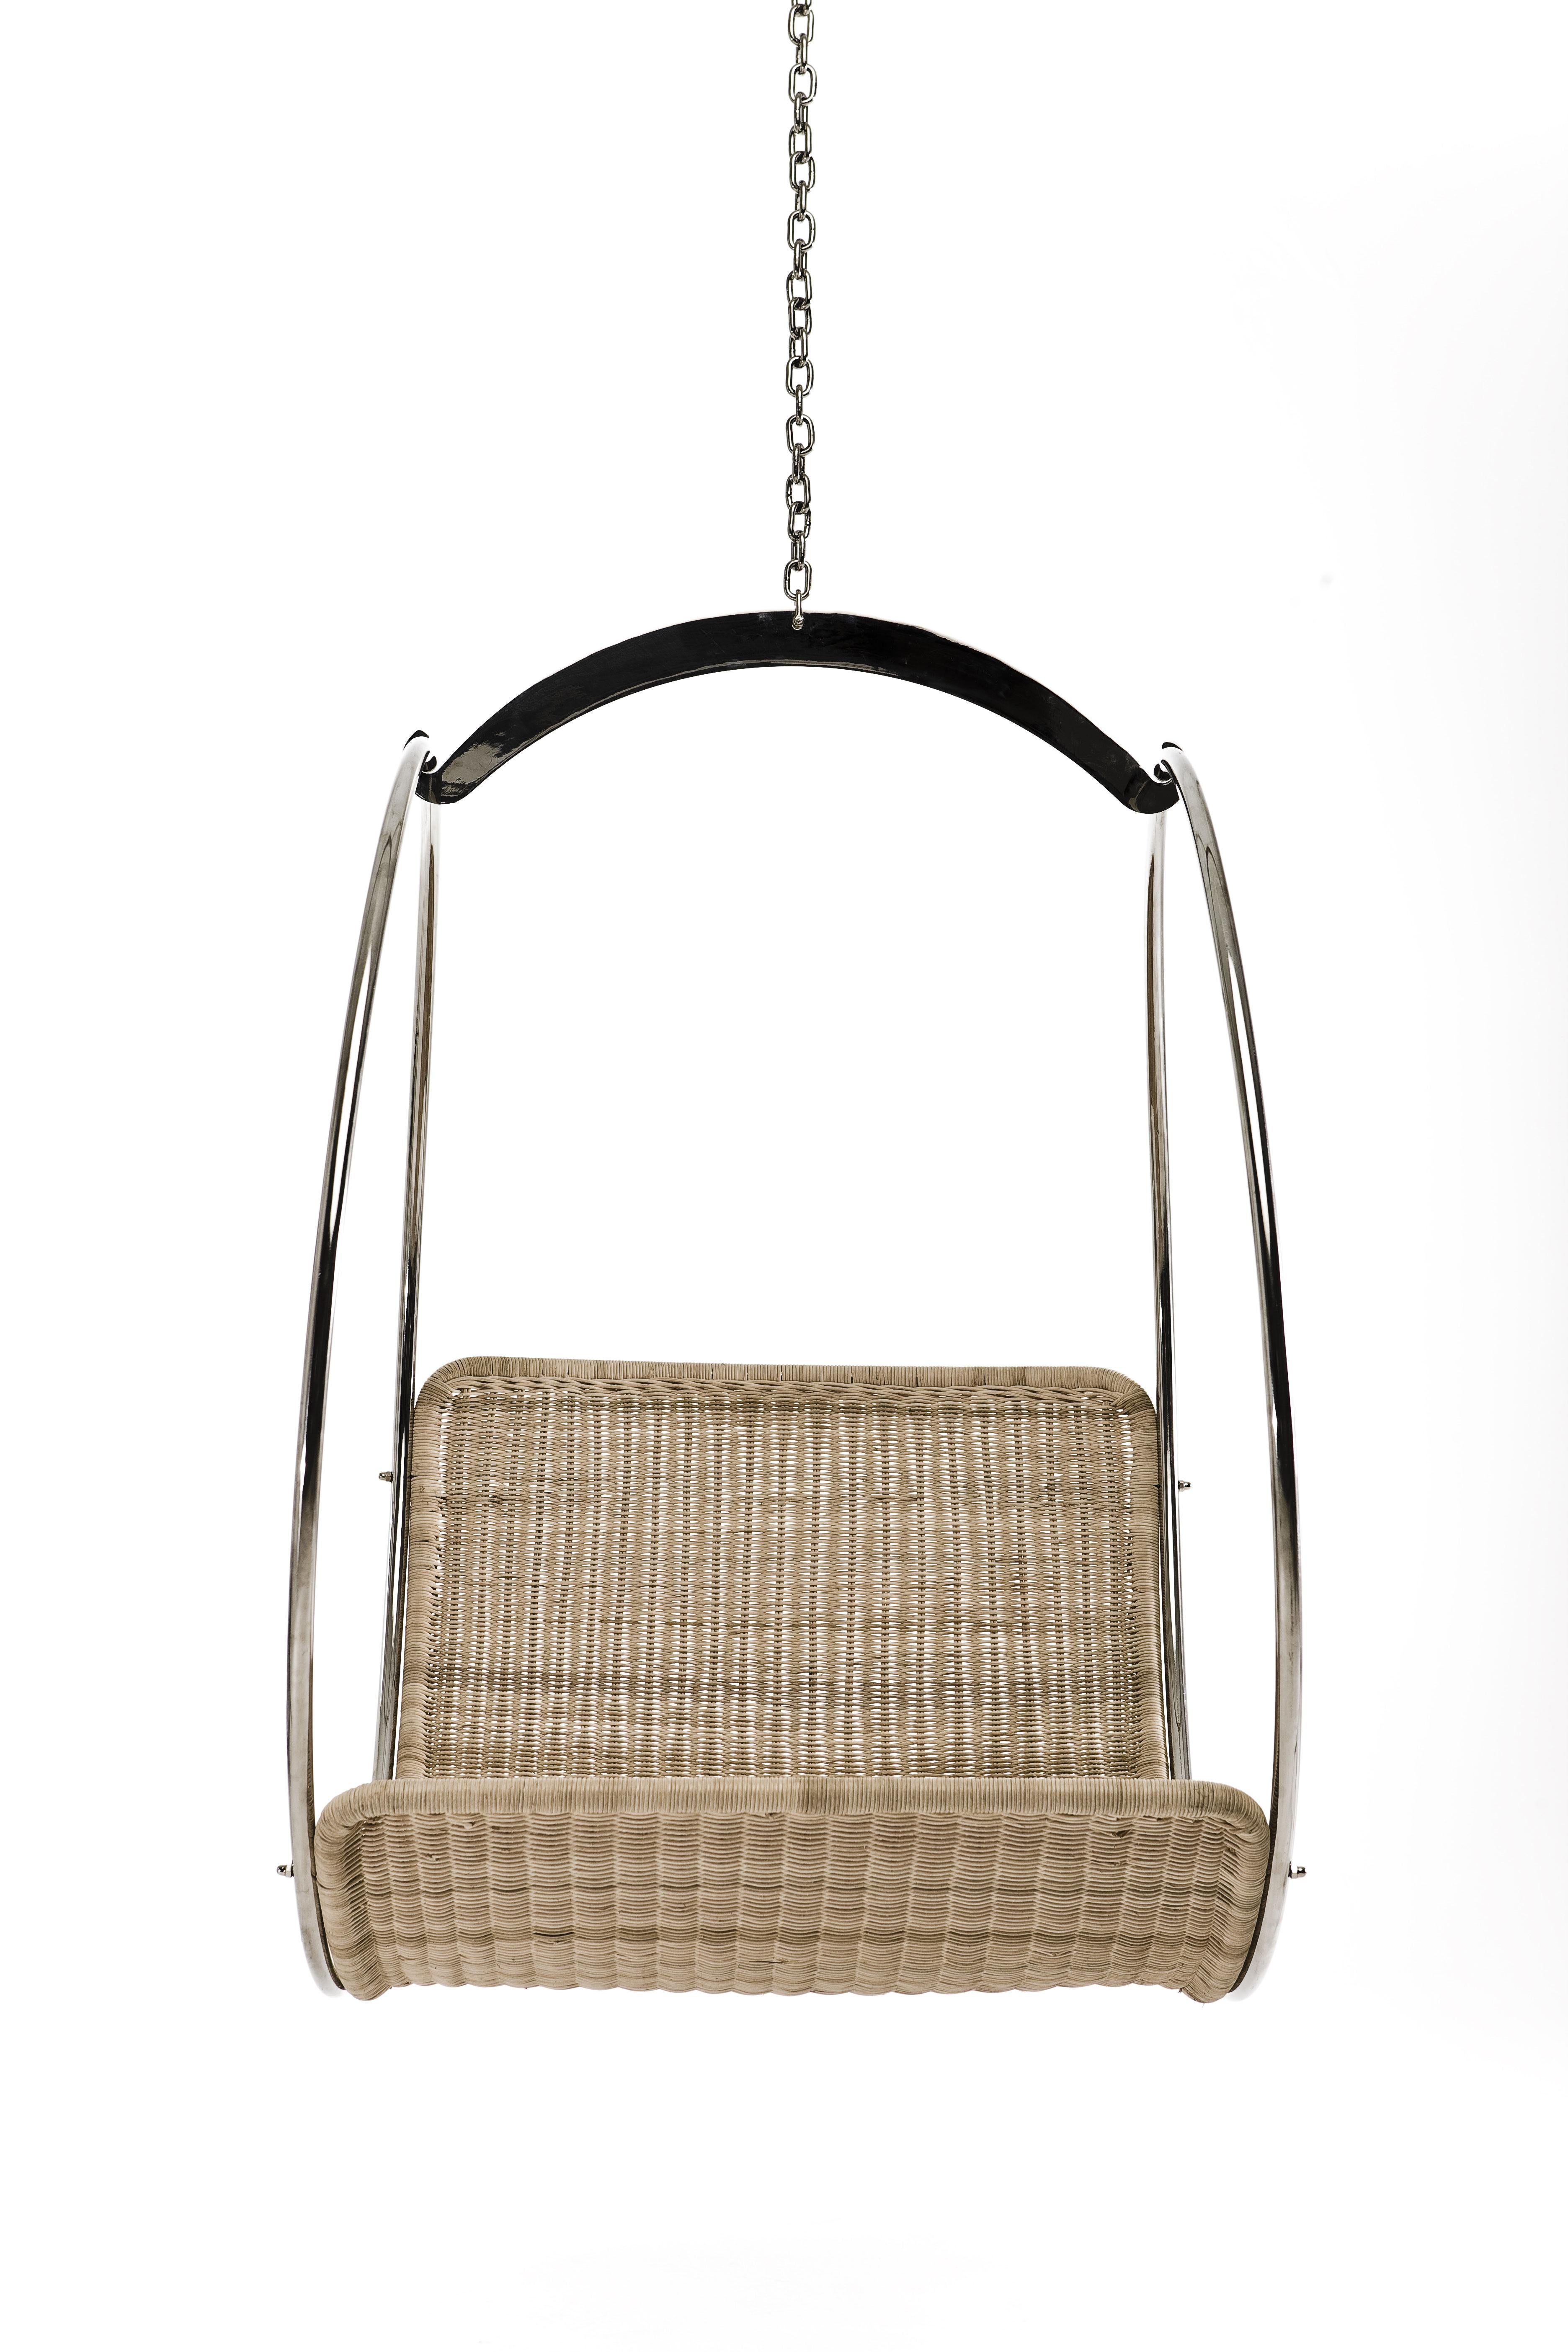 Leather Swing Chair by Egg Designs
Dimensions: 100 L X 80 D X 110 H cm 
Materials: Polished Stainless Steel, Synthetic Wicker

Founded by South Africans and life partners, Greg and Roche Dry - Egg is a unique perspective in contemporary